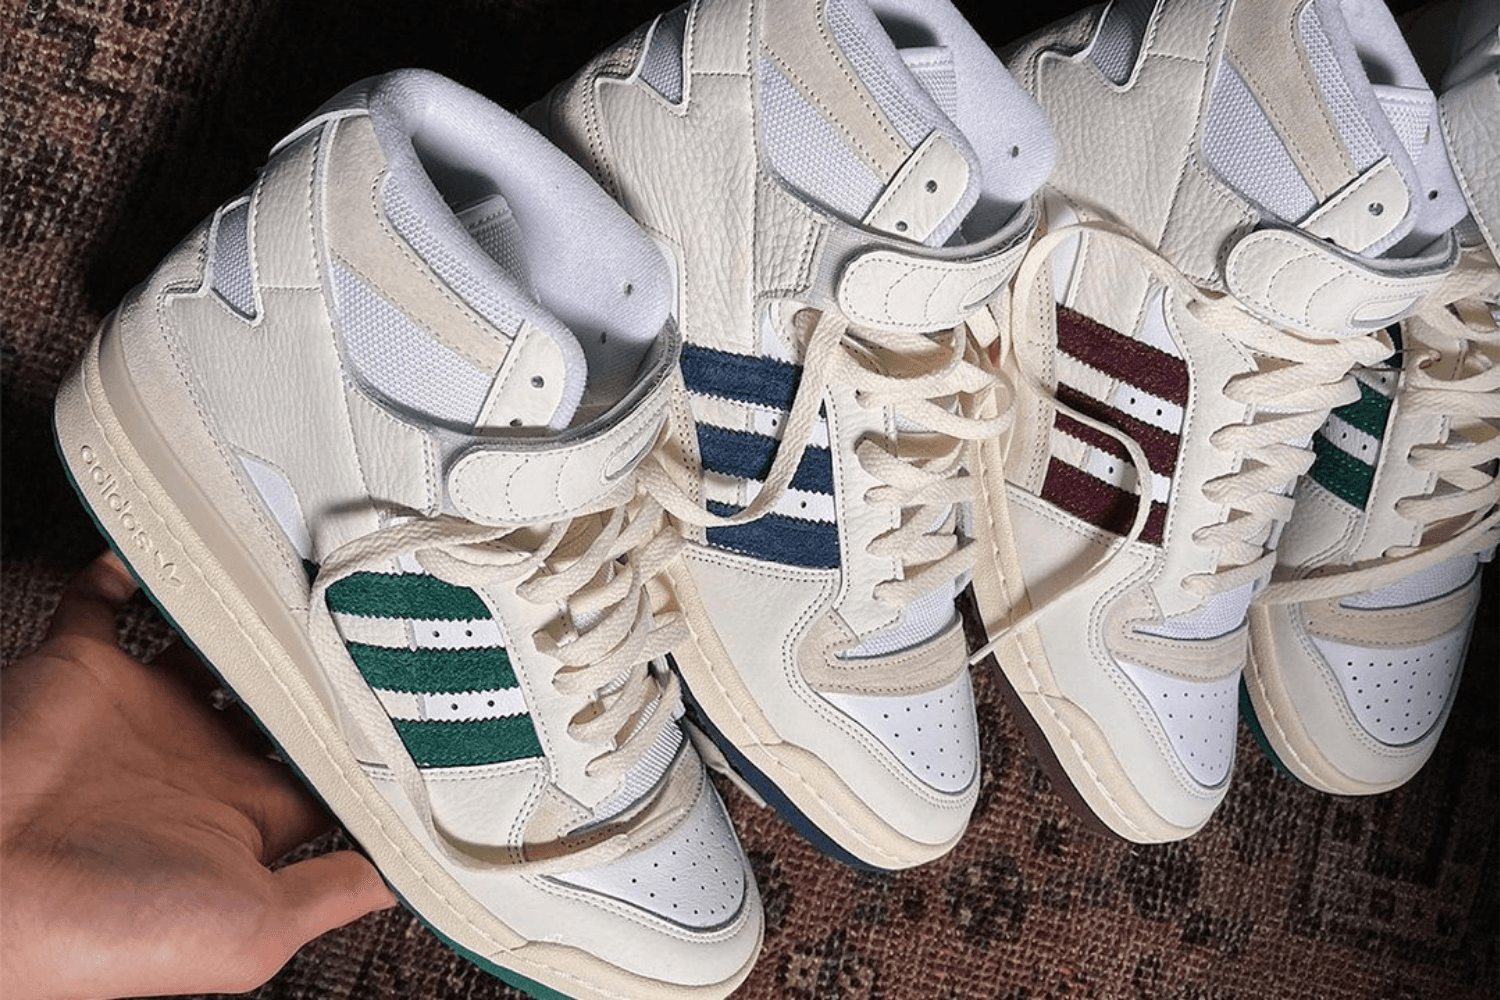 Packer Shoes and adidas collaborate on Forum 84 High